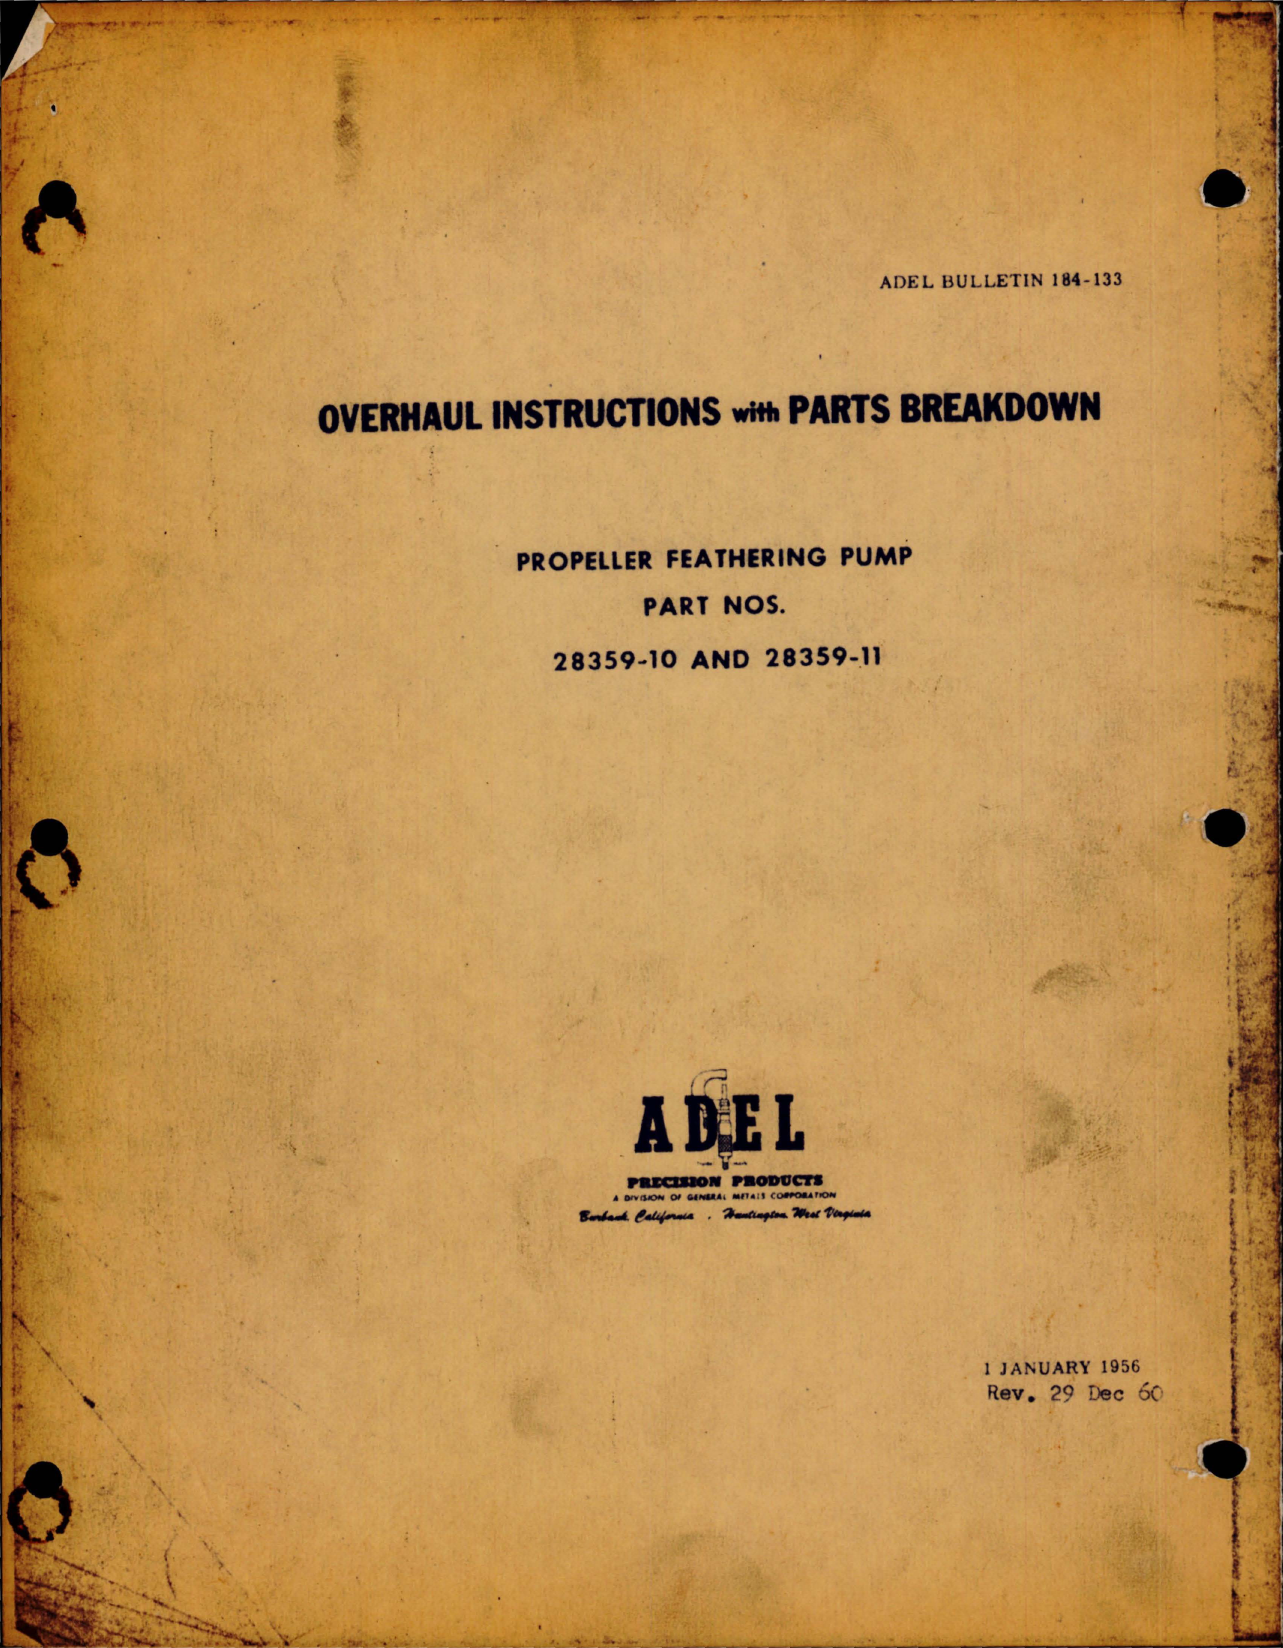 Sample page 1 from AirCorps Library document: Overhaul Instructions with Parts Breakdown for Propeller Feathering Pump - Parts 28359-10 and 28359-11 